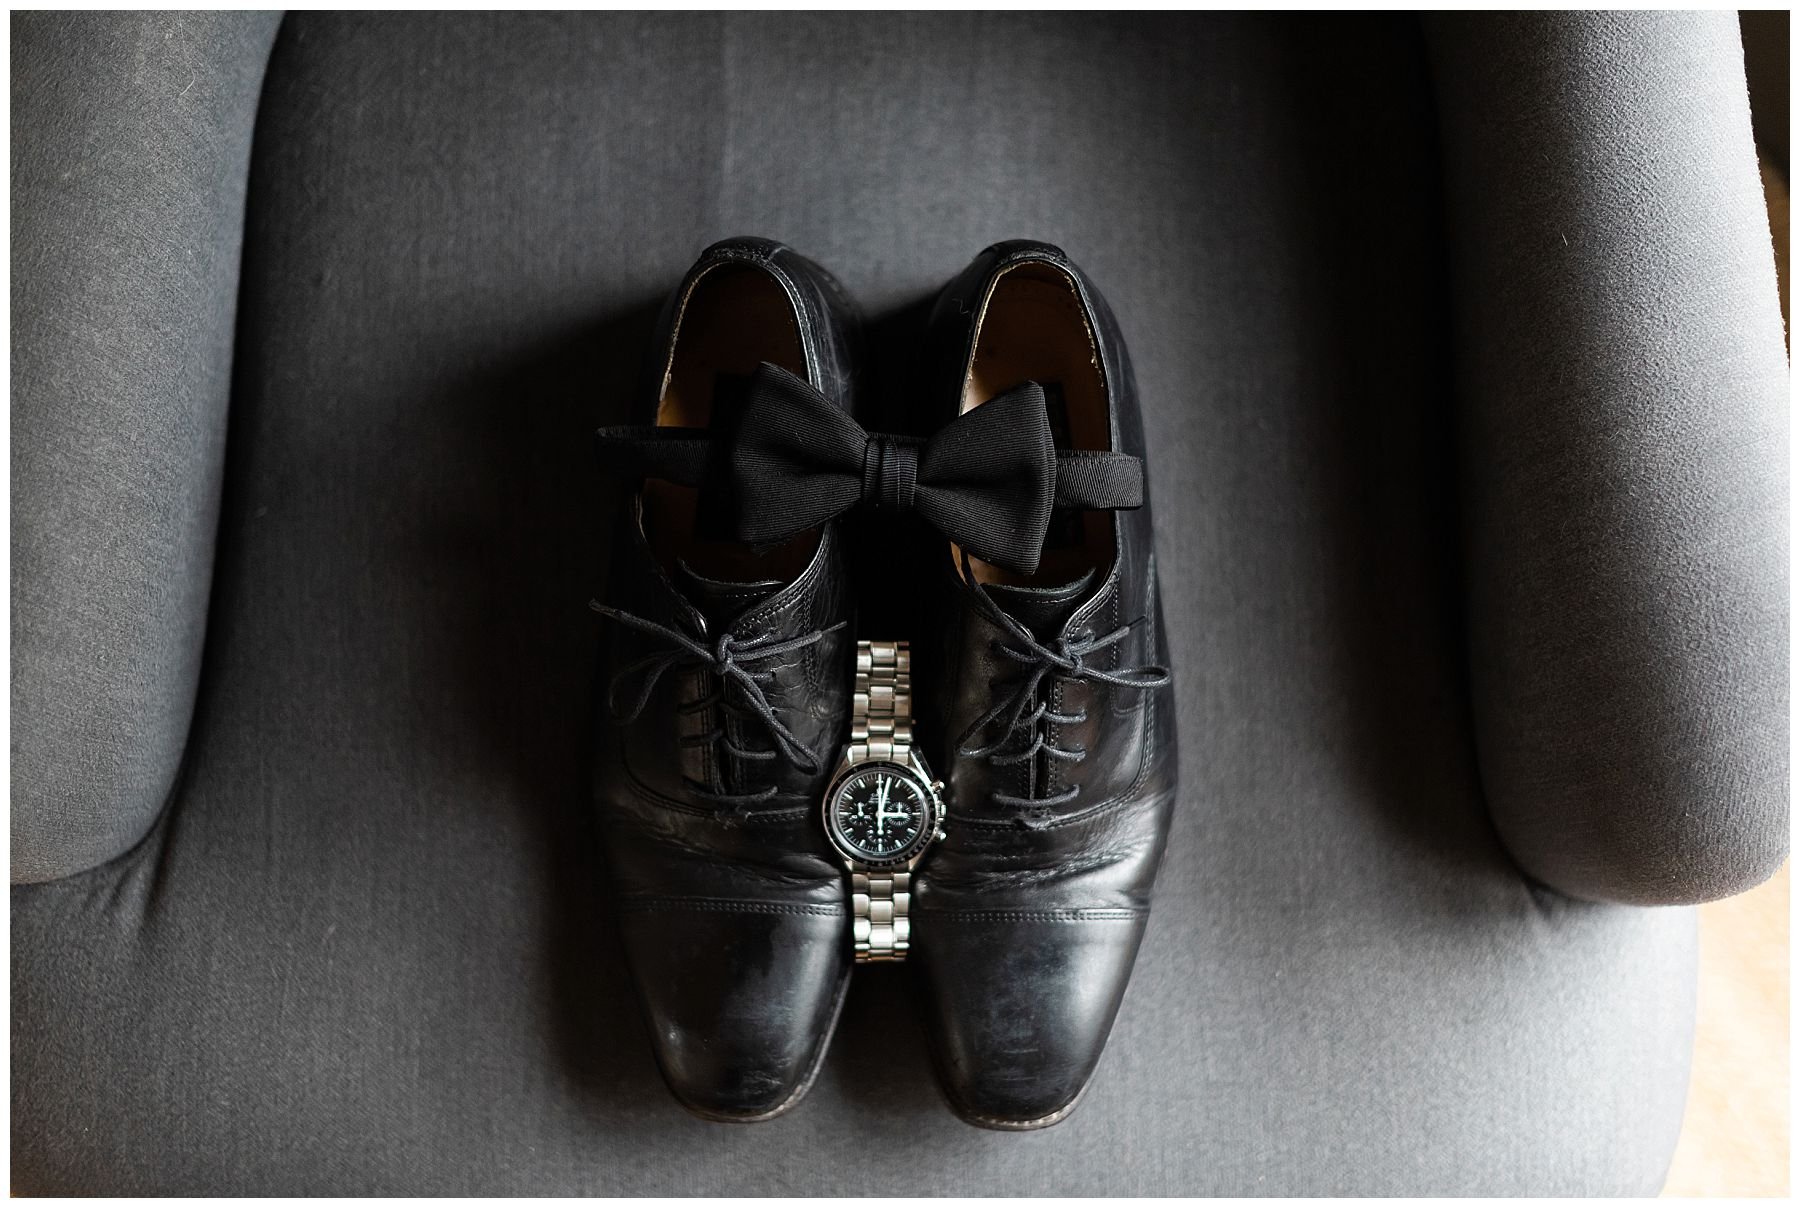 Groom detail shots of dress shoes, bow tie and watch